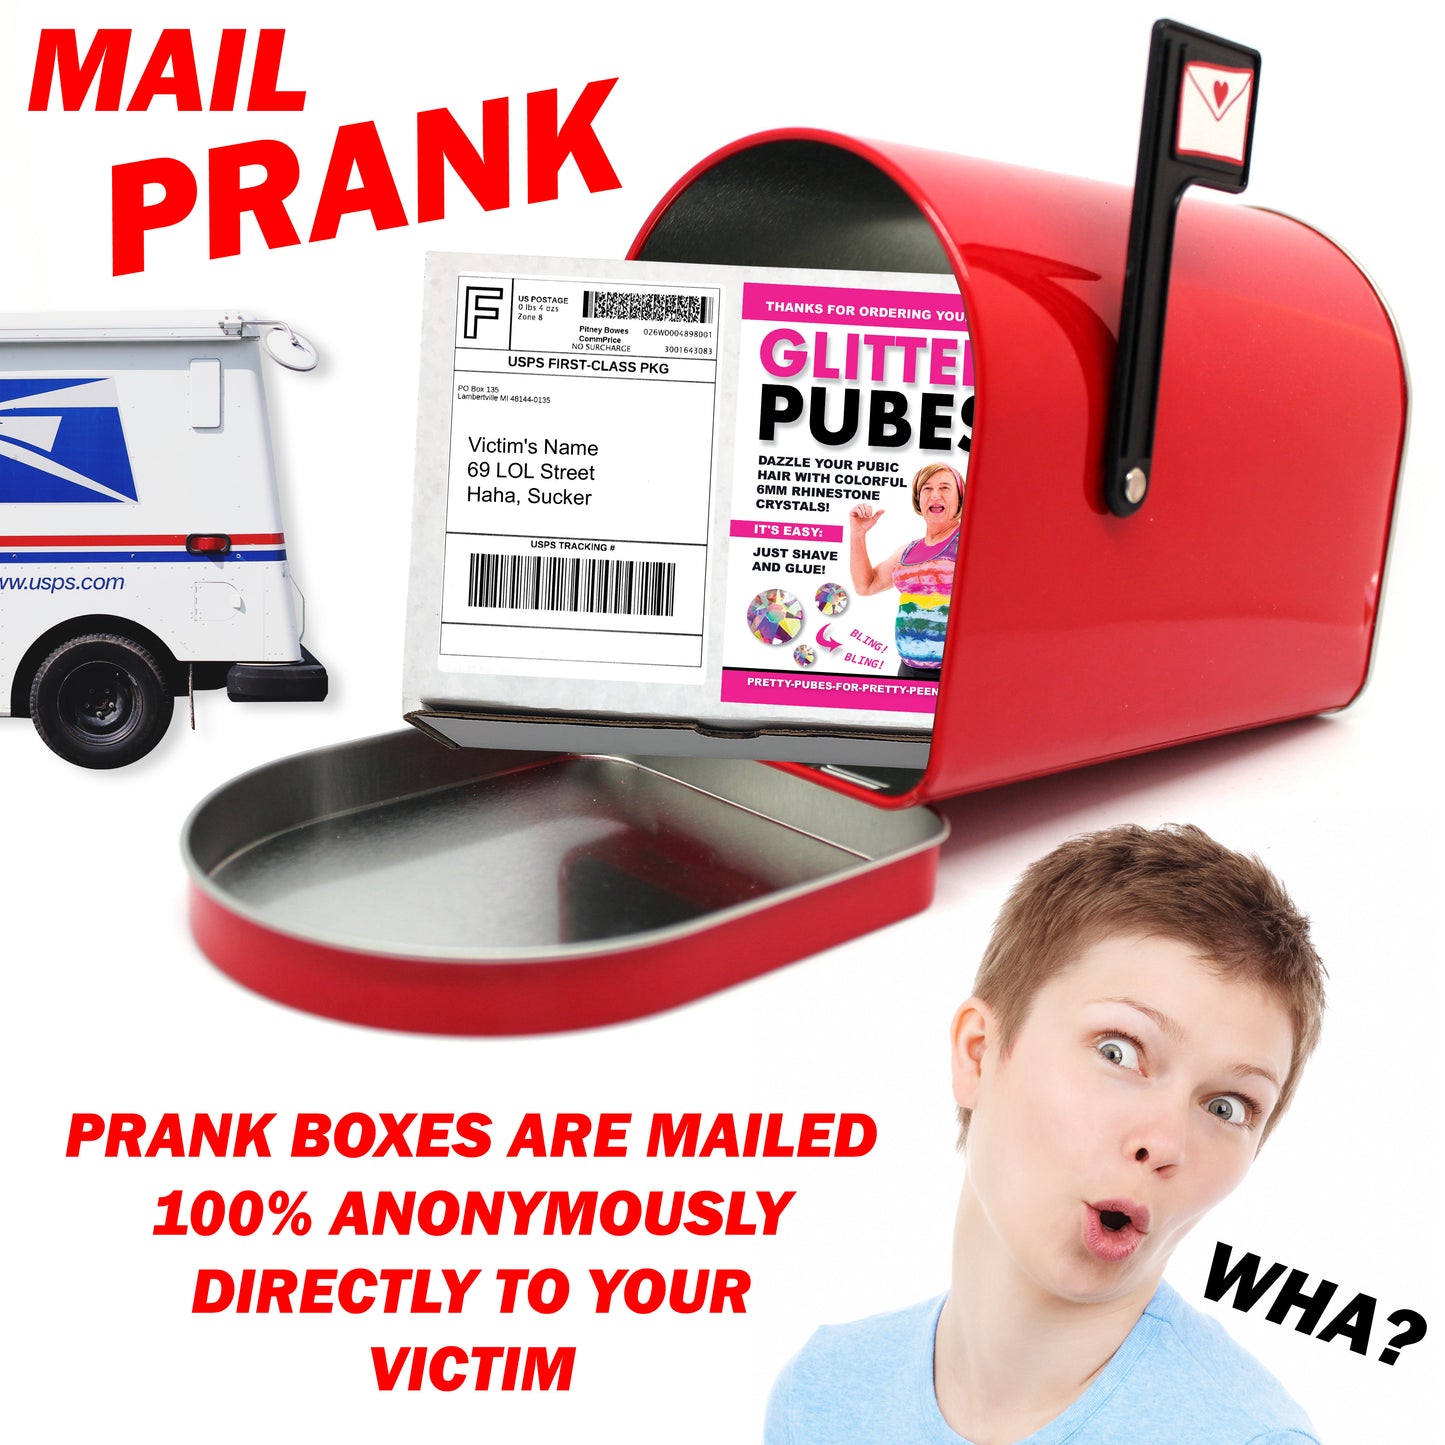 Prank Mail - Glitter Pubes embarrassing prank box gets mailed directly to your victims 100% anonymously!